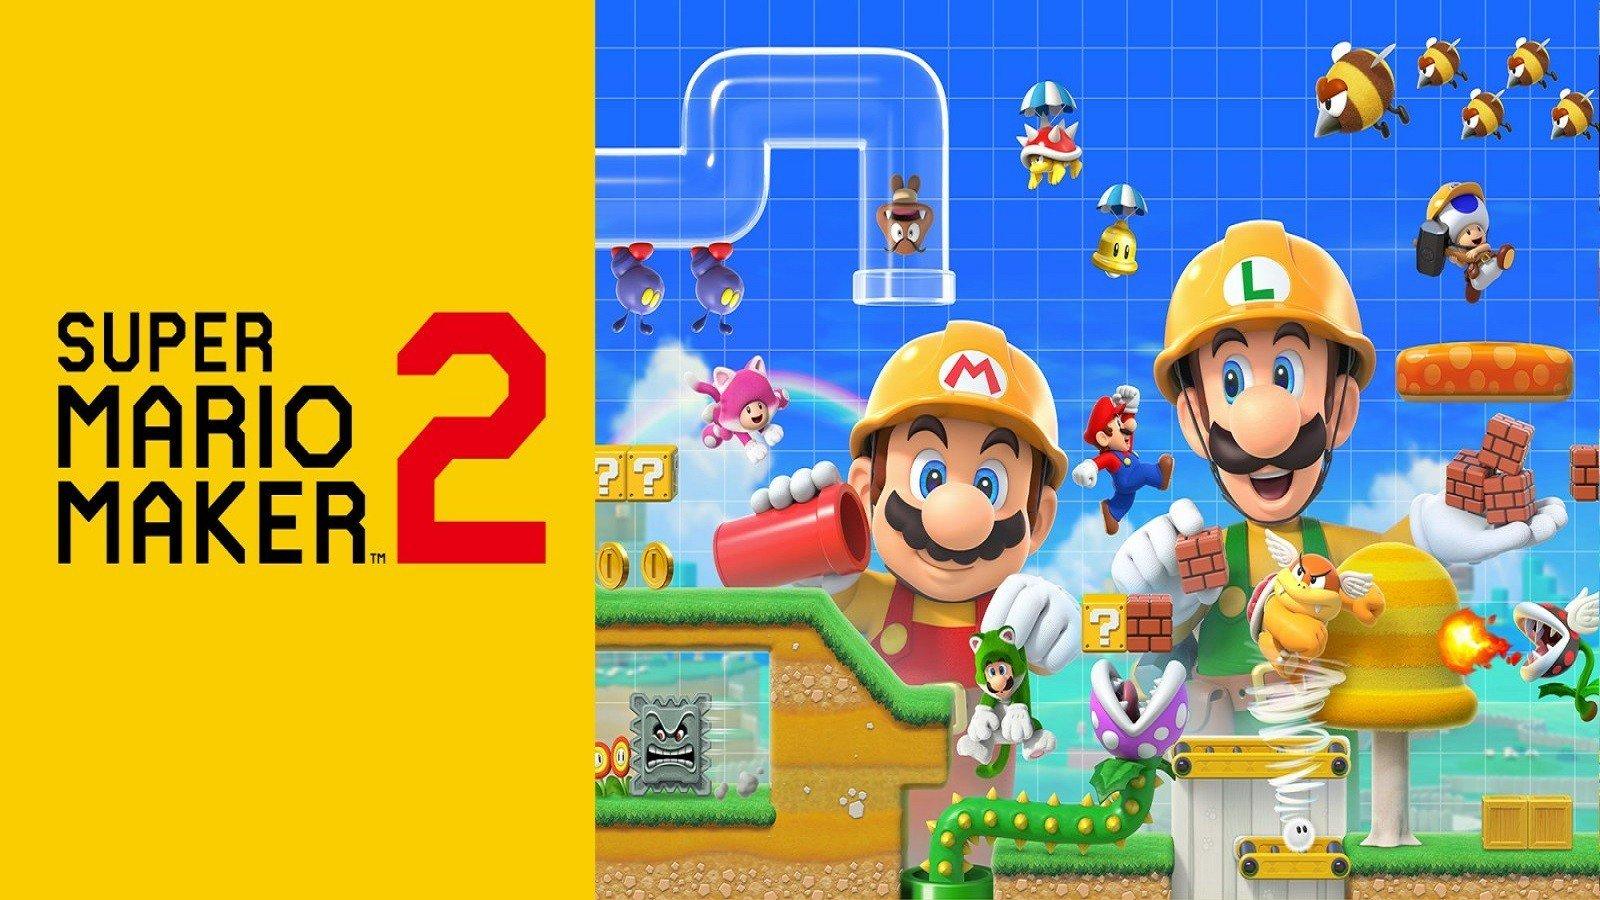 What is included with Super Mario Maker 2 Limited Edition?